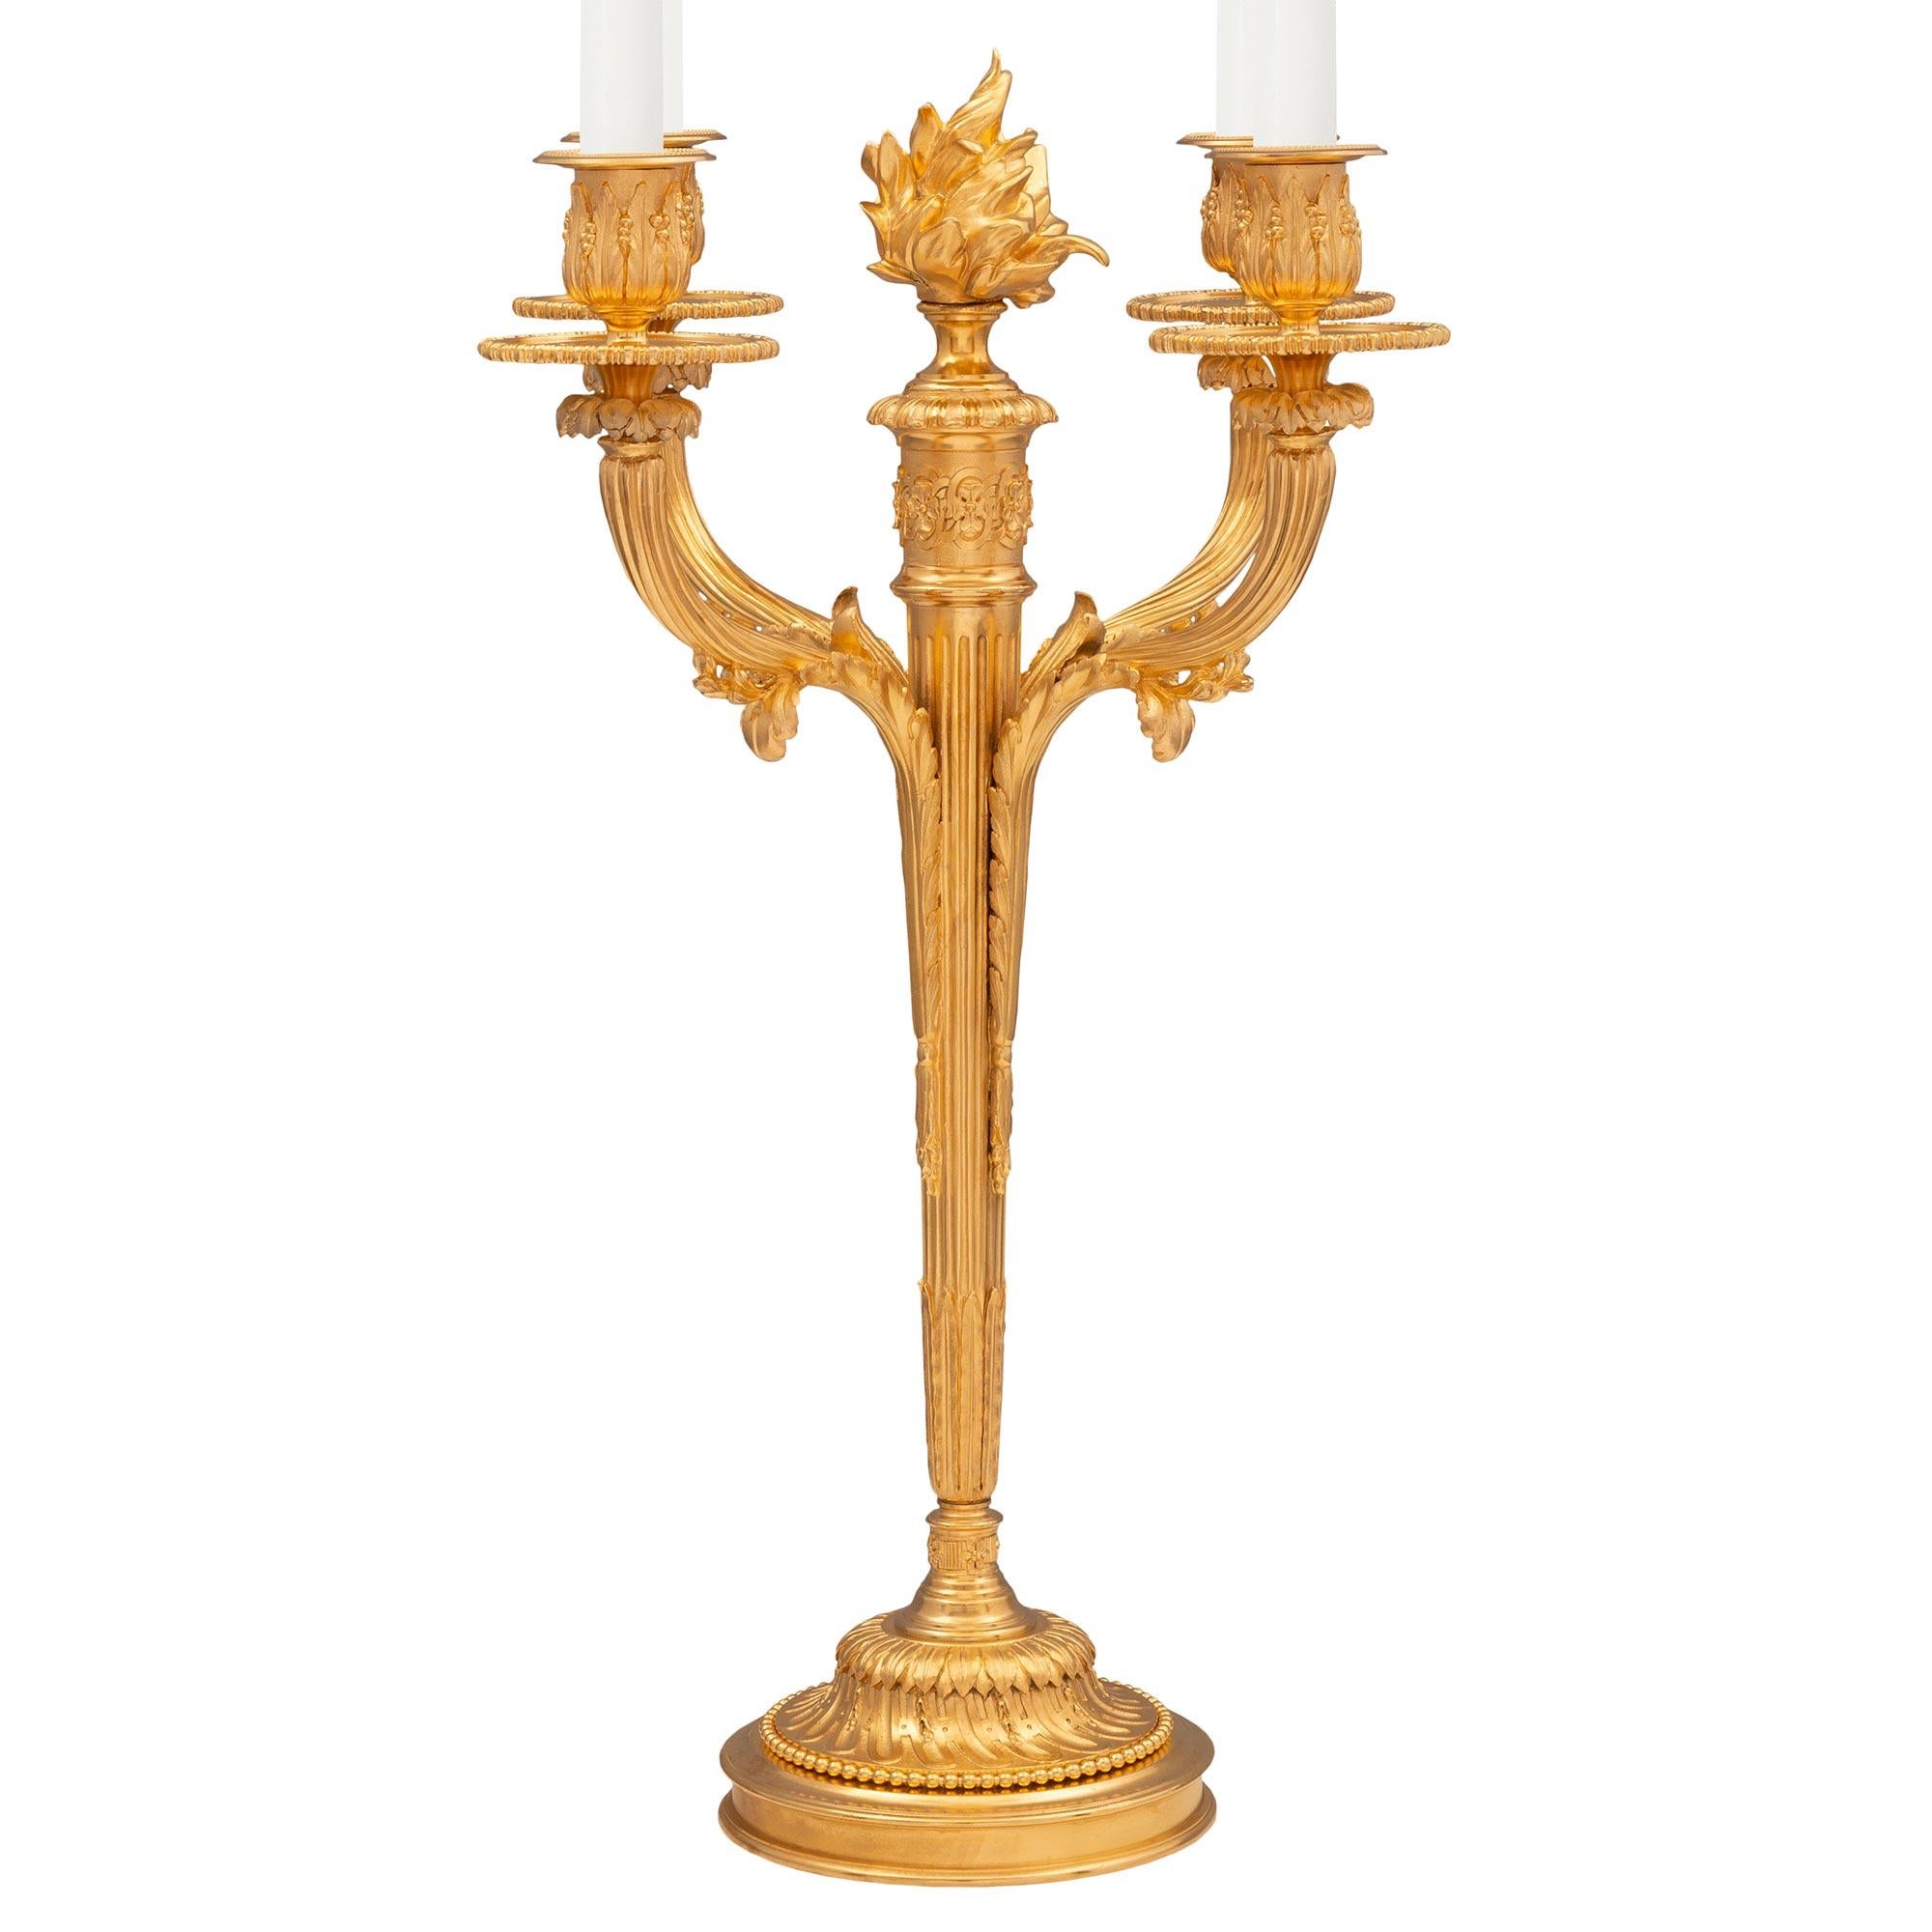 A most elegant pair of French 19th century Louis XVI st. Ormolu candelabras. Each four arm candelabra is raised by a most elegant circular mottled base with a beautiful spiraled acanthus leaf design and a fine wrap around beaded band. The striking